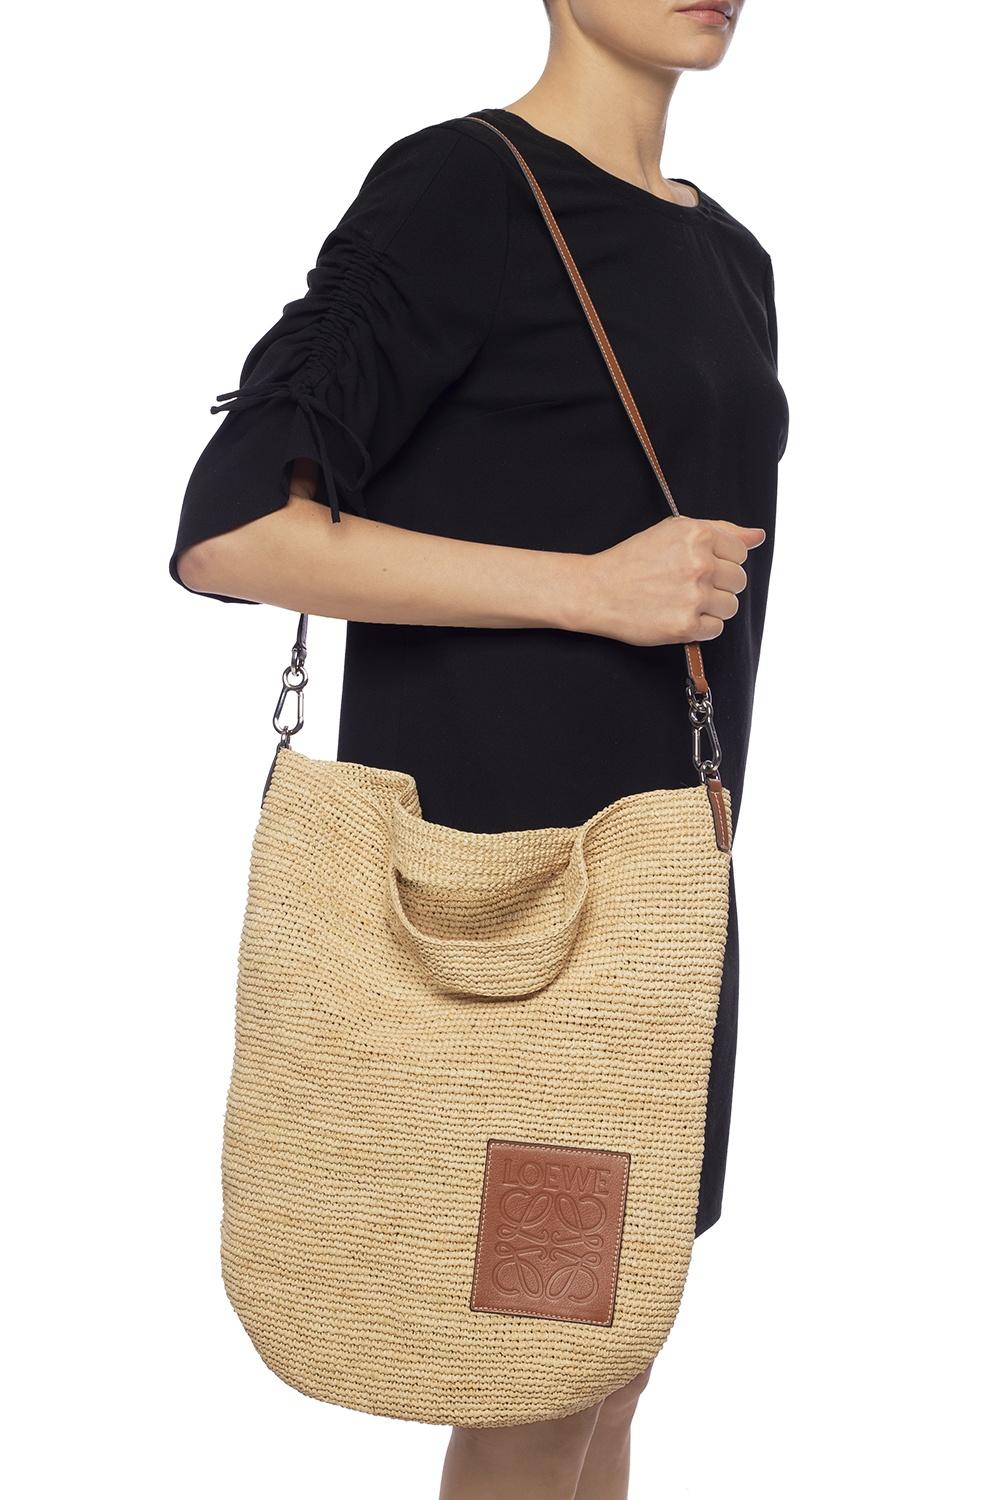 Loewe Slit Leather-trimmed Raffia Tote in Natural | Lyst